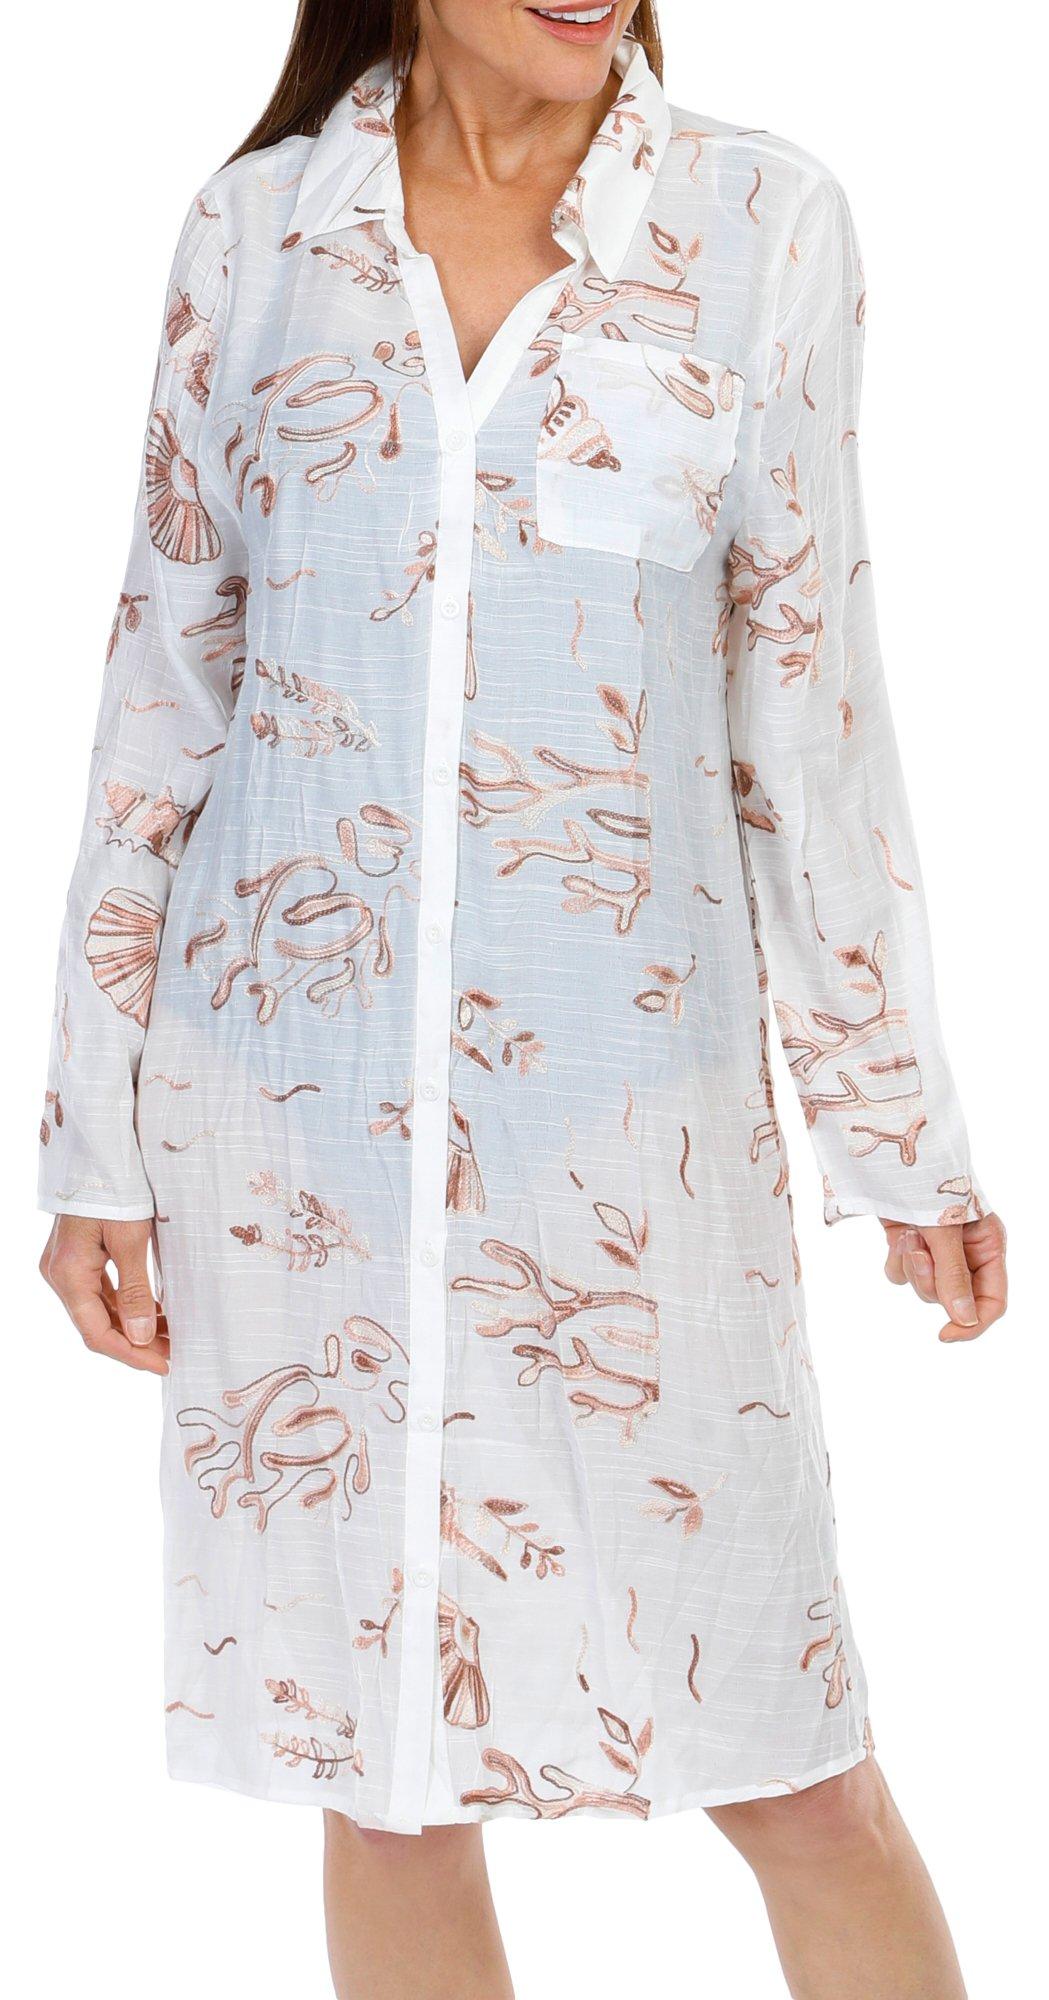 Women's Embroidered Floral Button Down Swim Coverup